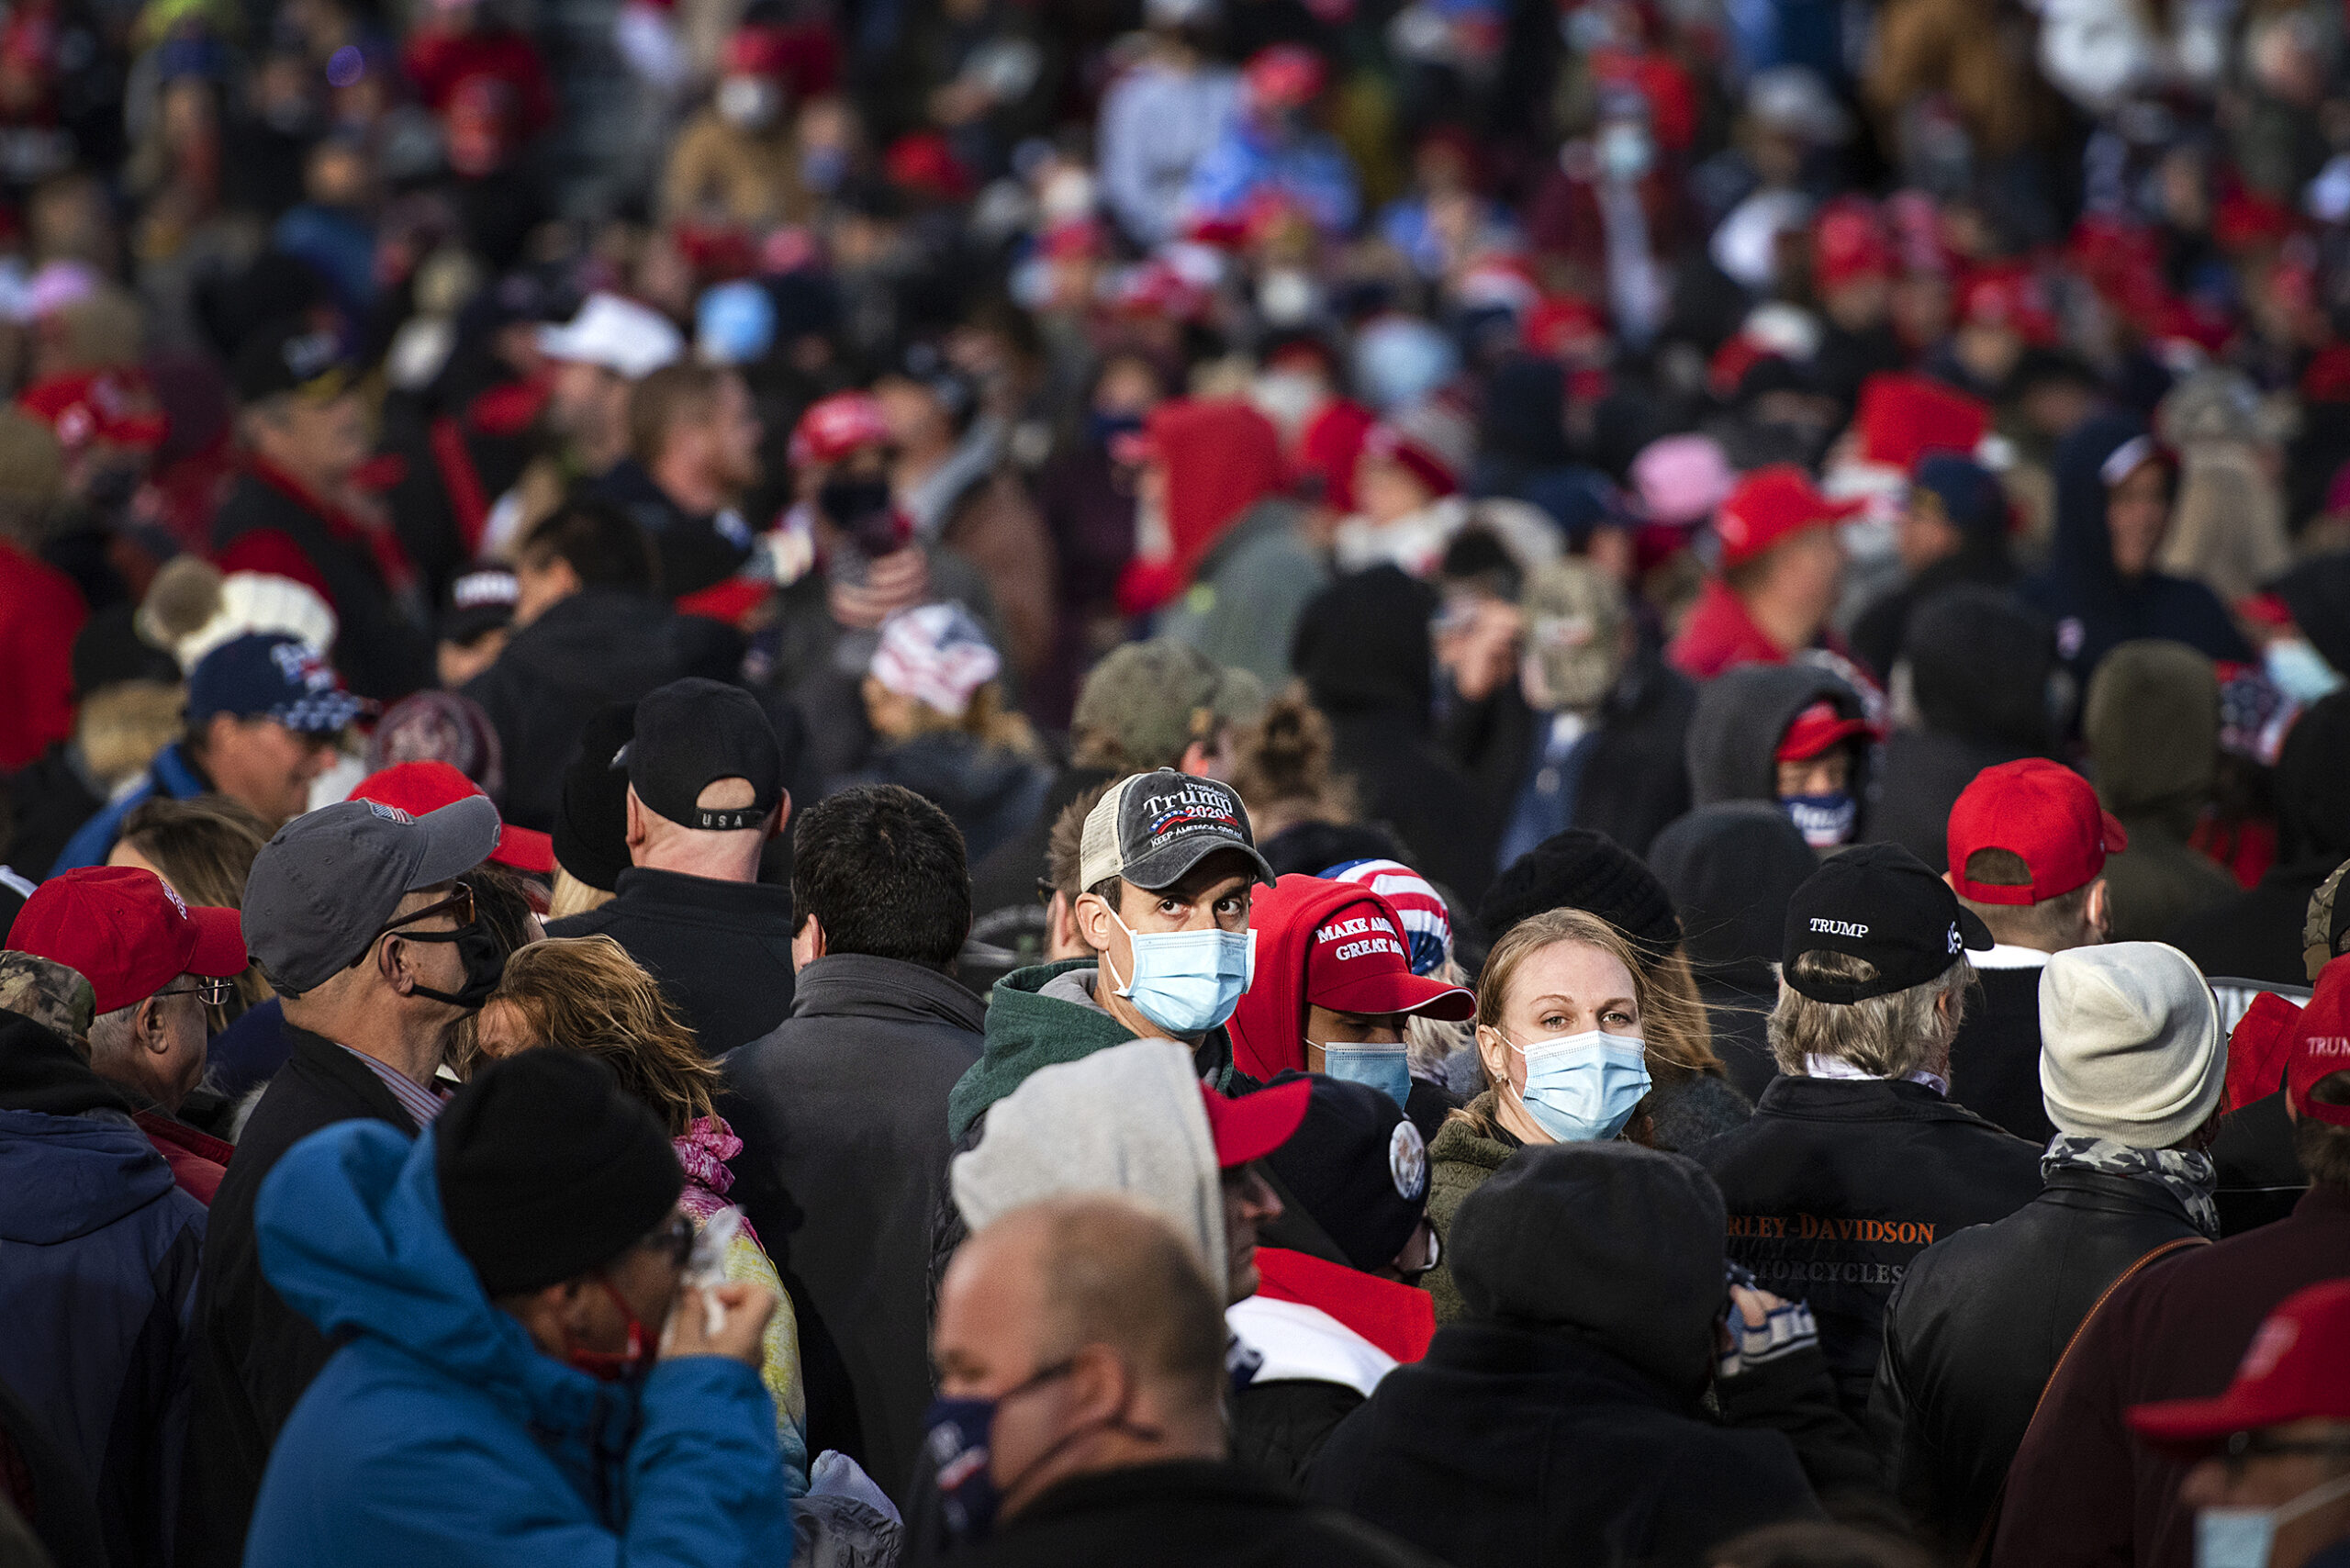 A man in a Trump hat and face mask is surrounded by fellow Trump supporters